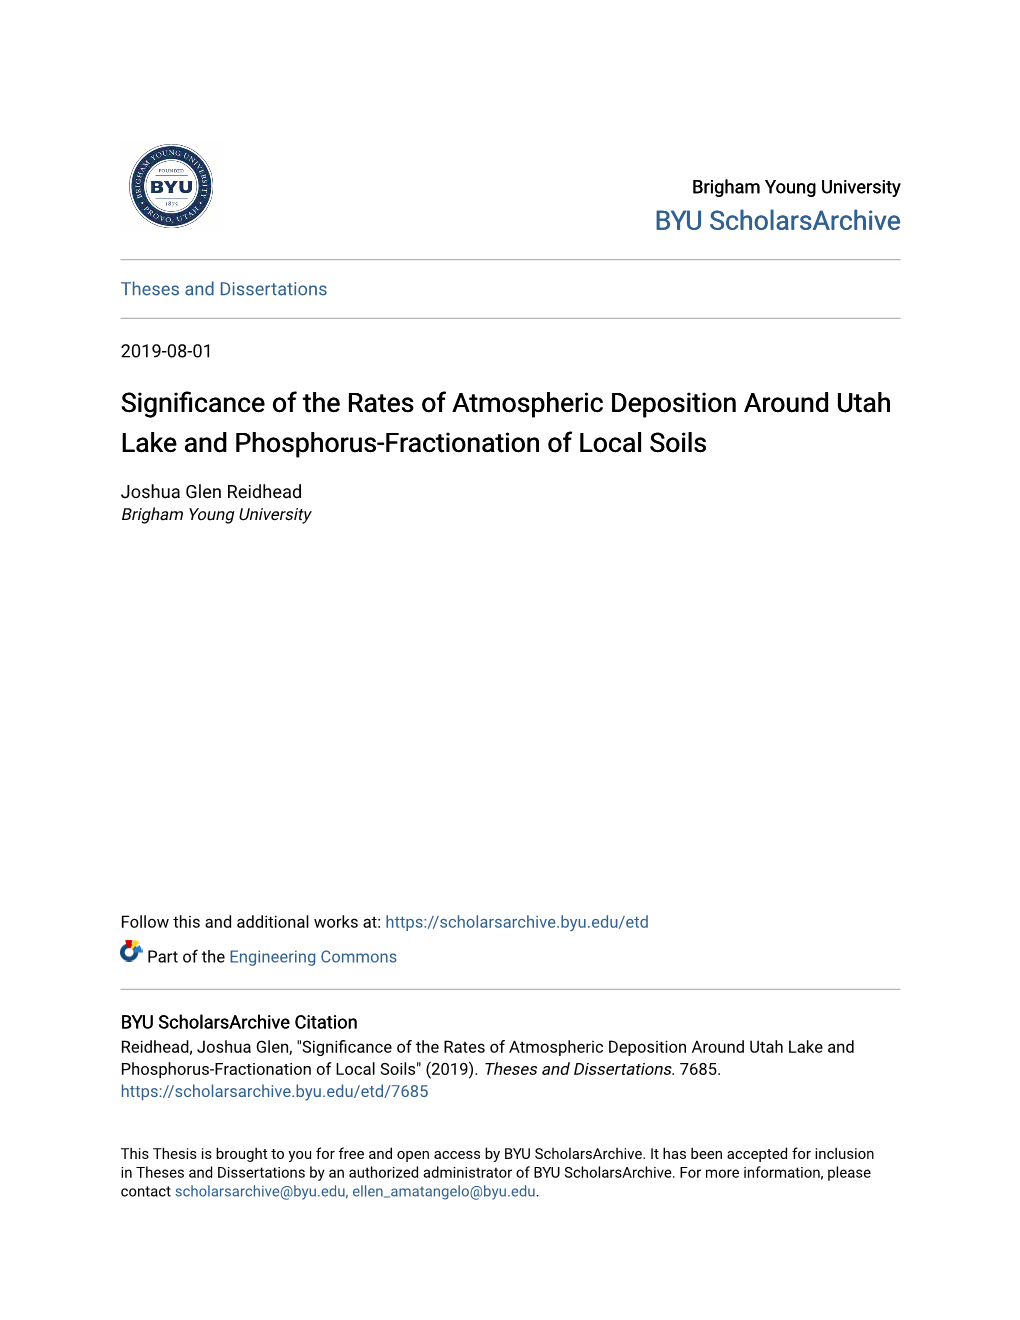 Significance of the Rates of Atmospheric Deposition Around Utah Lake and Phosphorus-Fractionation of Local Soils" (2019)